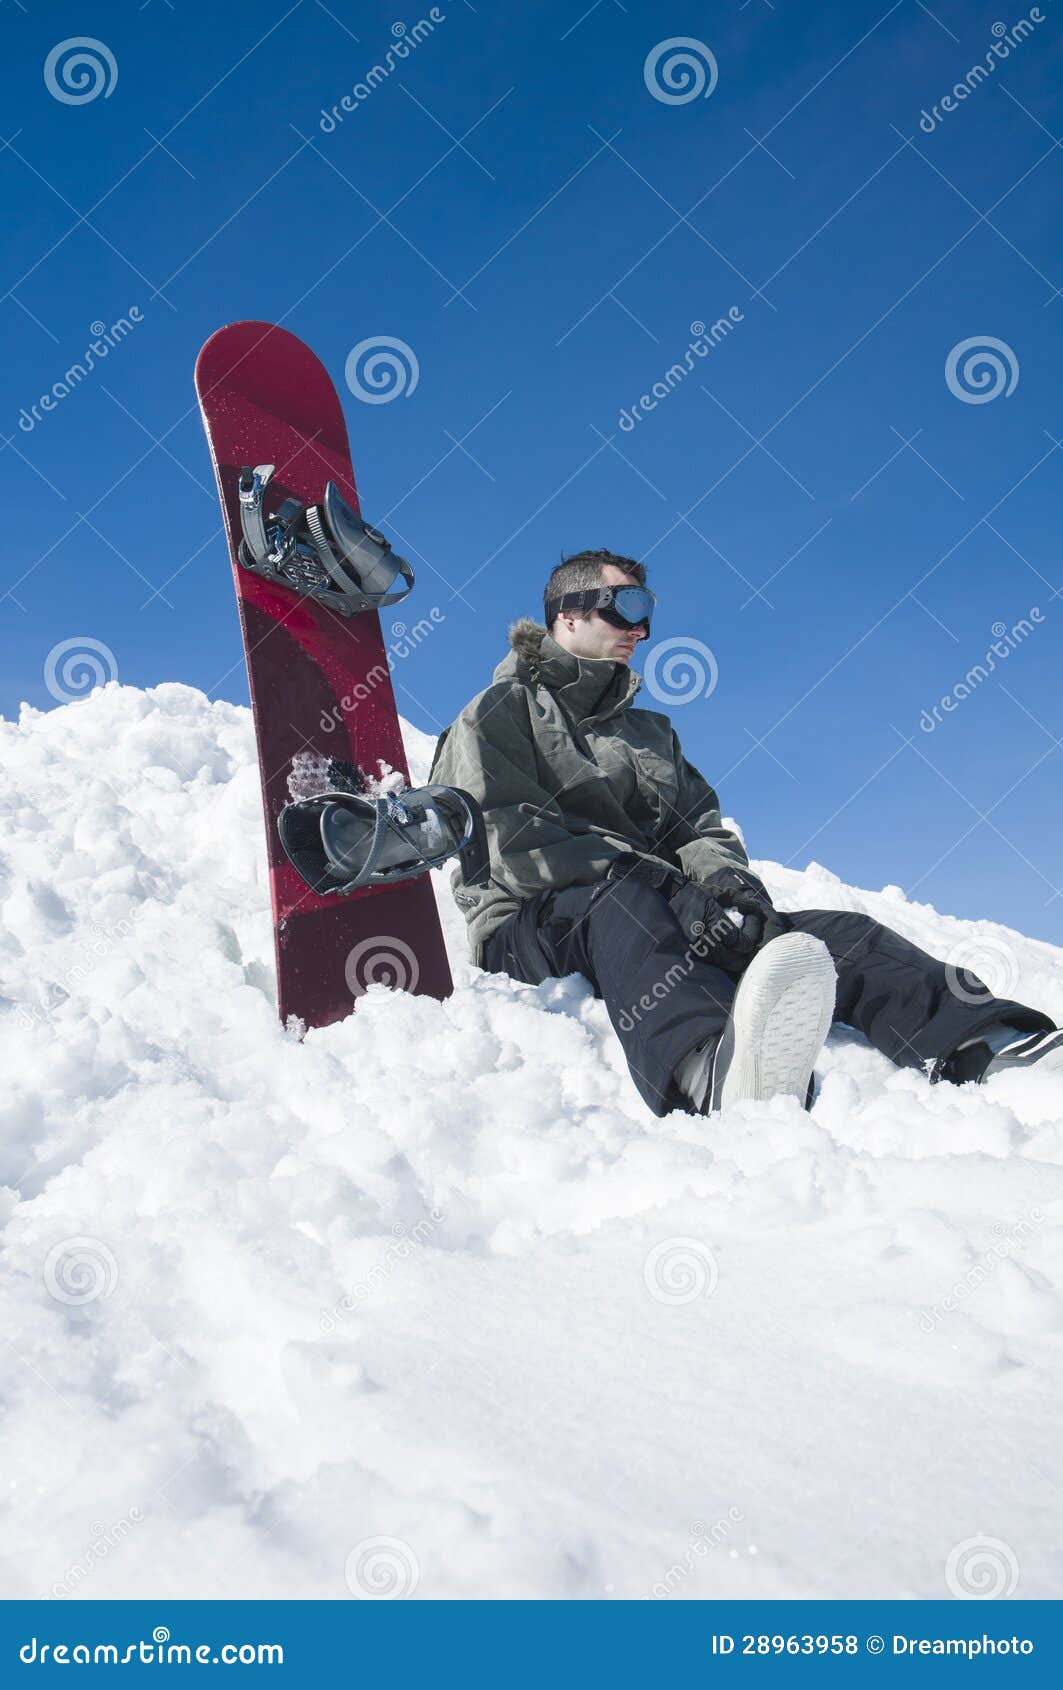 Skier sitting in snow stock photo. Image of extreme, mount - 28963958